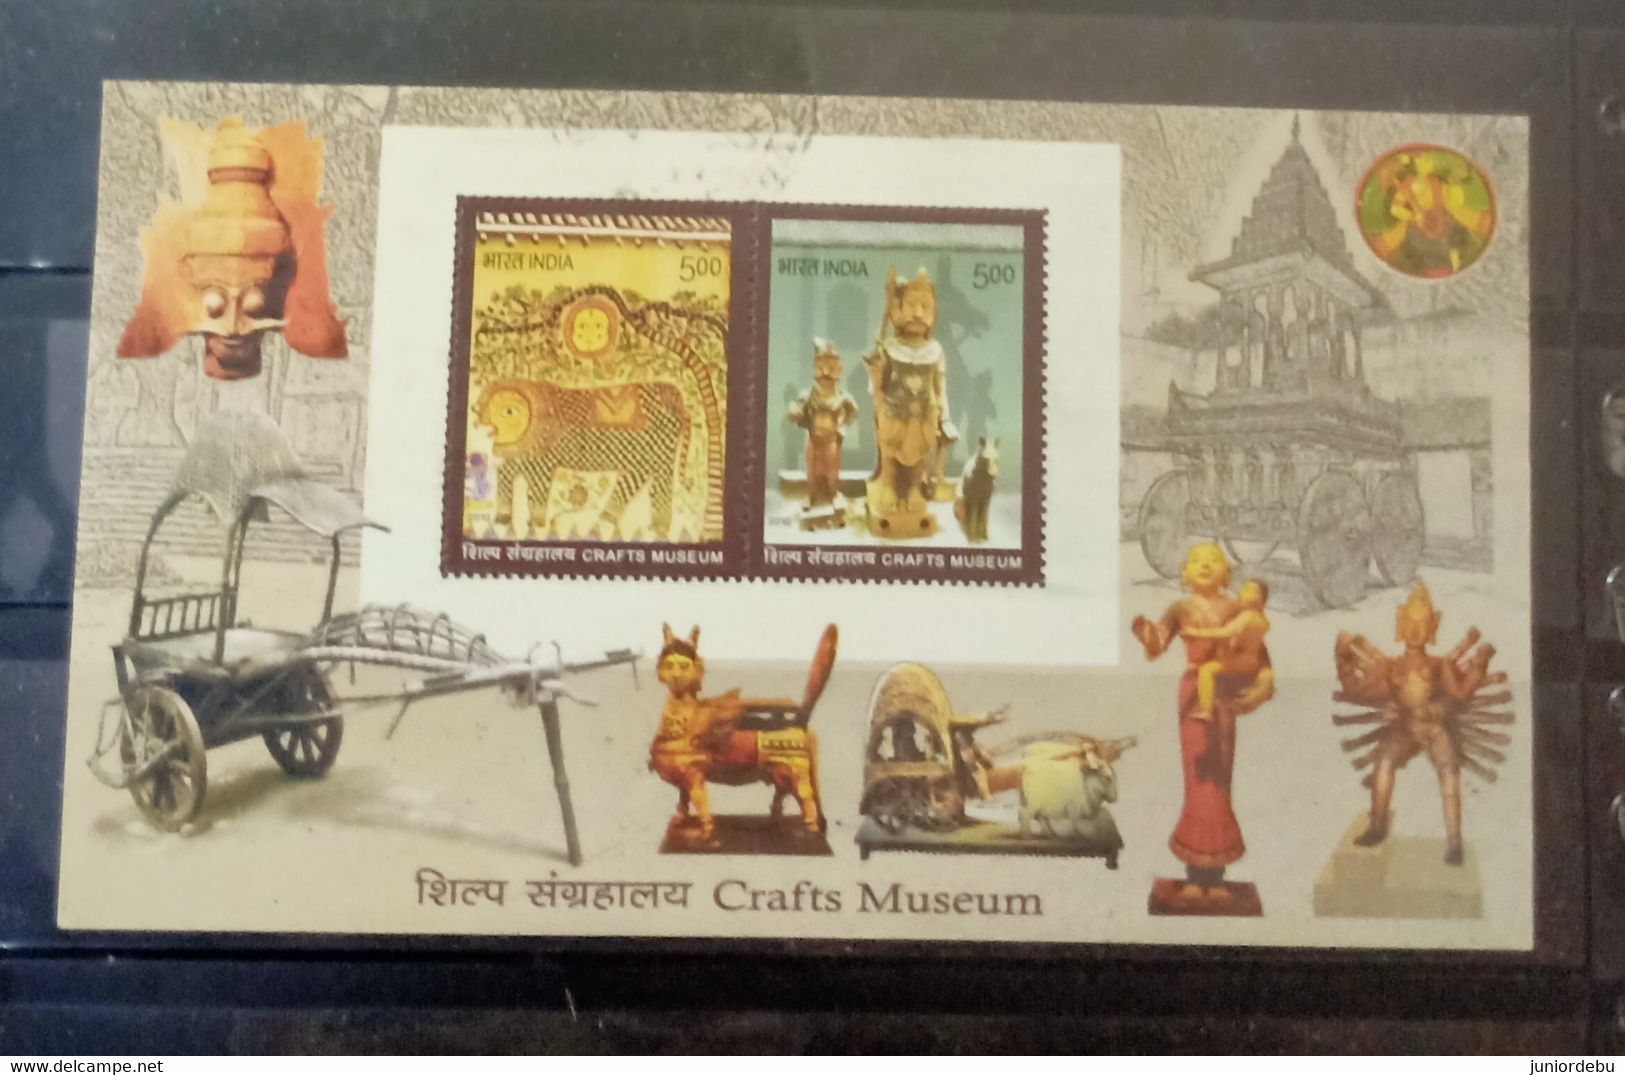 India - 2010 -  Crafts Museum - Miniature Sheet  - Used. Condition As Per Scan. - Gebruikt